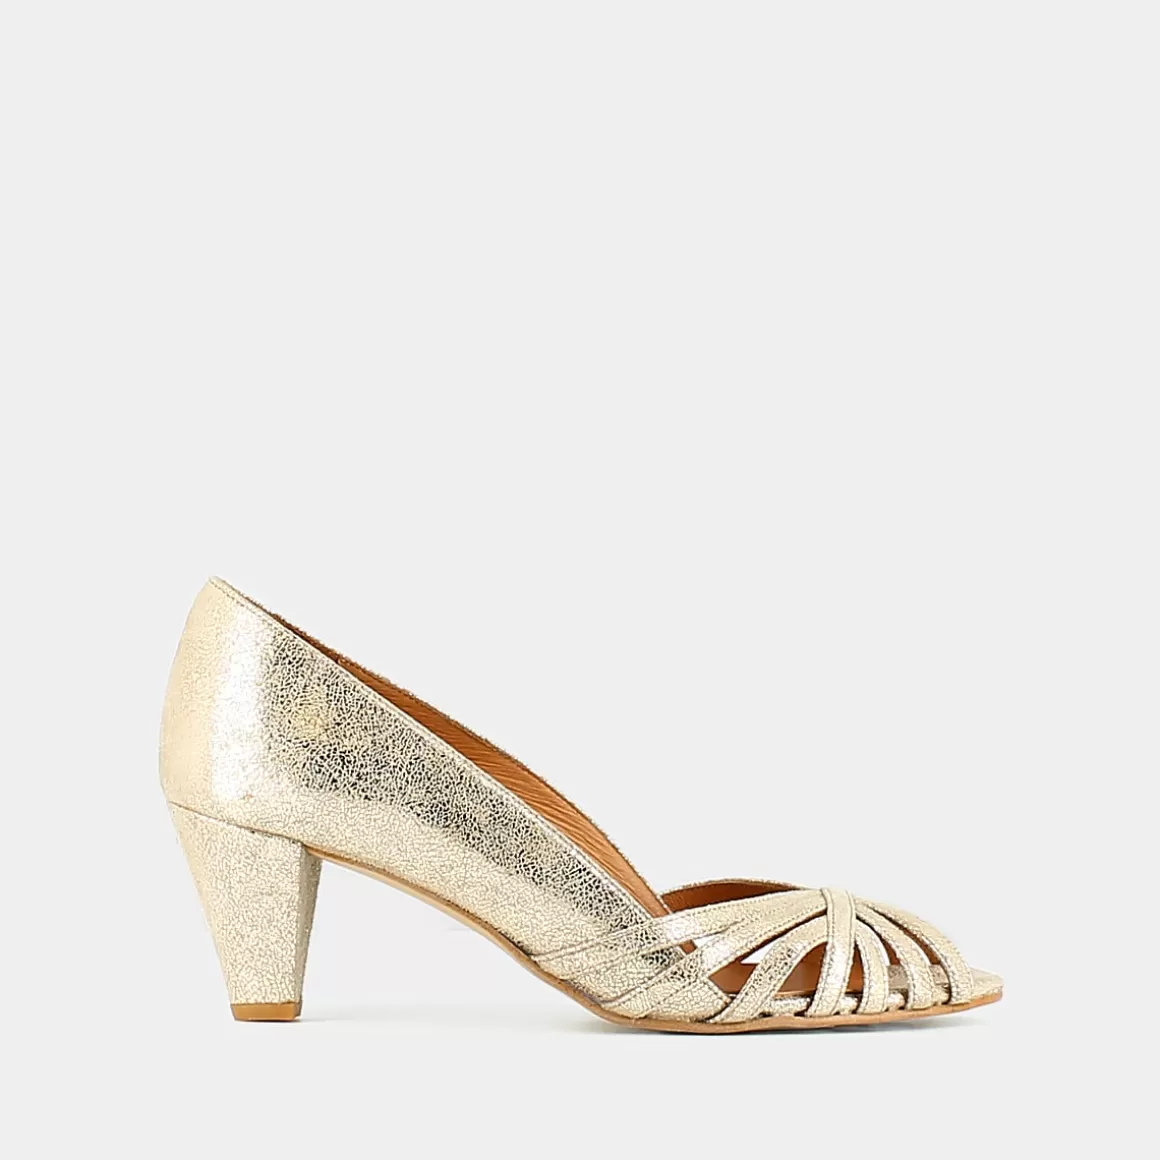 Open toe pumps with thick heels<Jonak Cheap